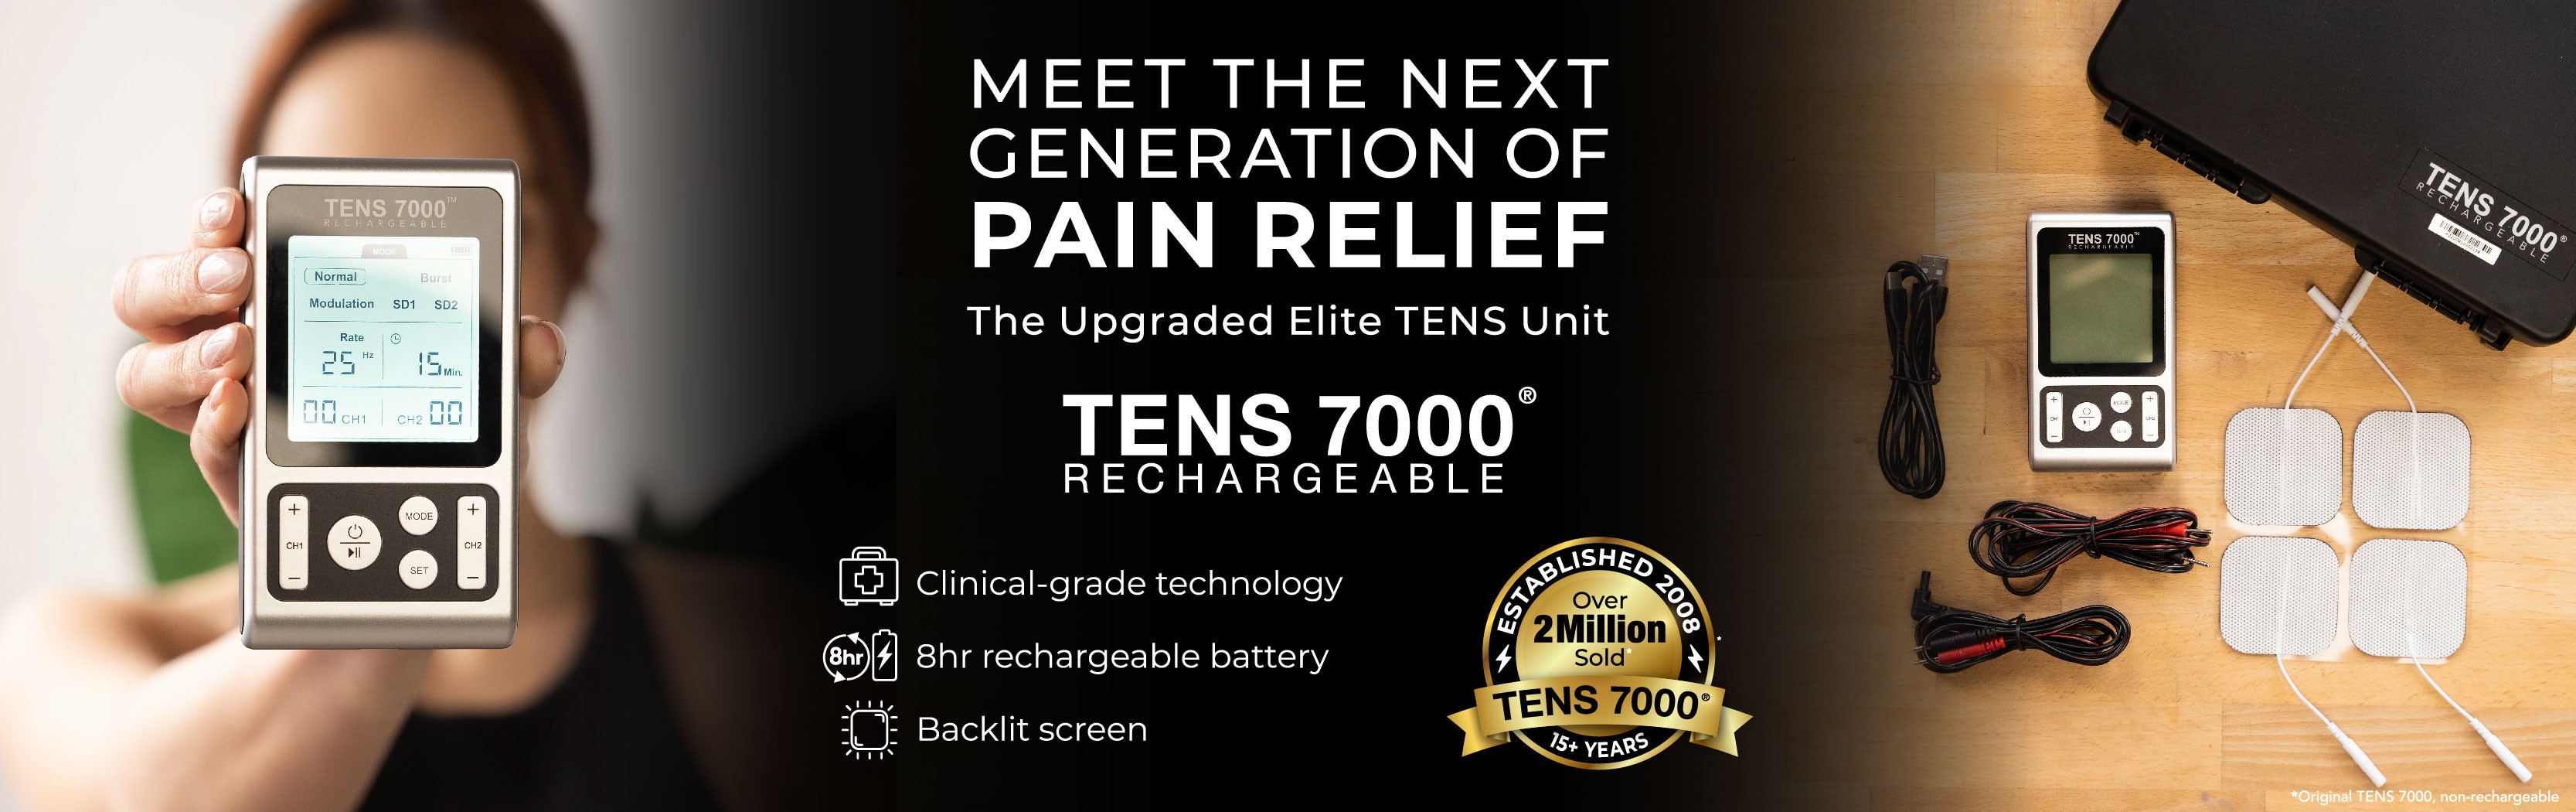 Meet the Next Generation of Pain Relief: The Upgraded Elite TENS unit - TENS 7000 Rechargeable - Clinical-grade technology - 8hr rechargeable battery - Backlit screen